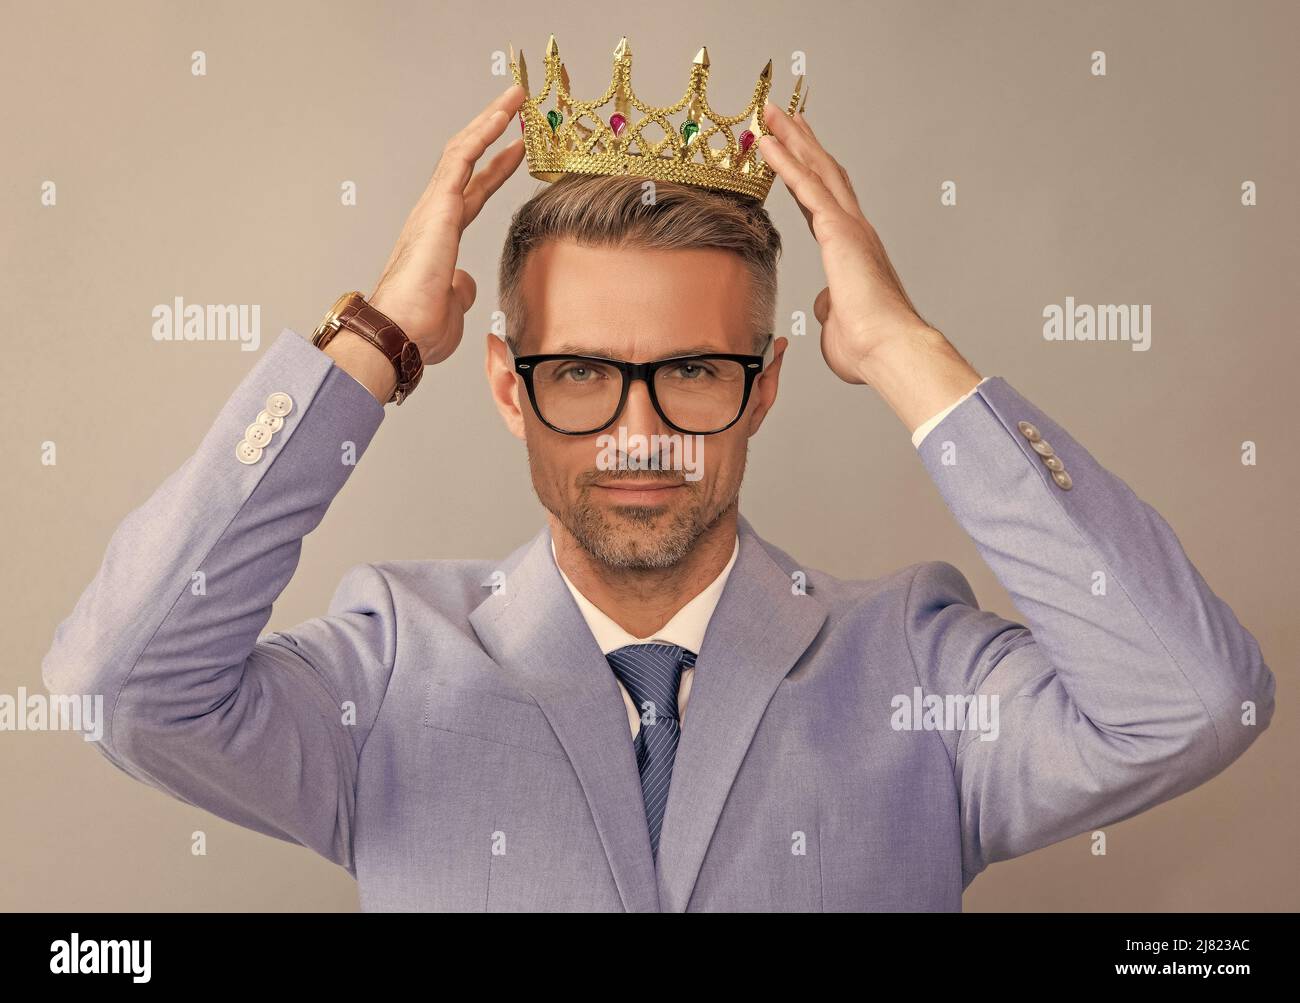 grizzled guy wearing king crown on grey background, success Stock Photo